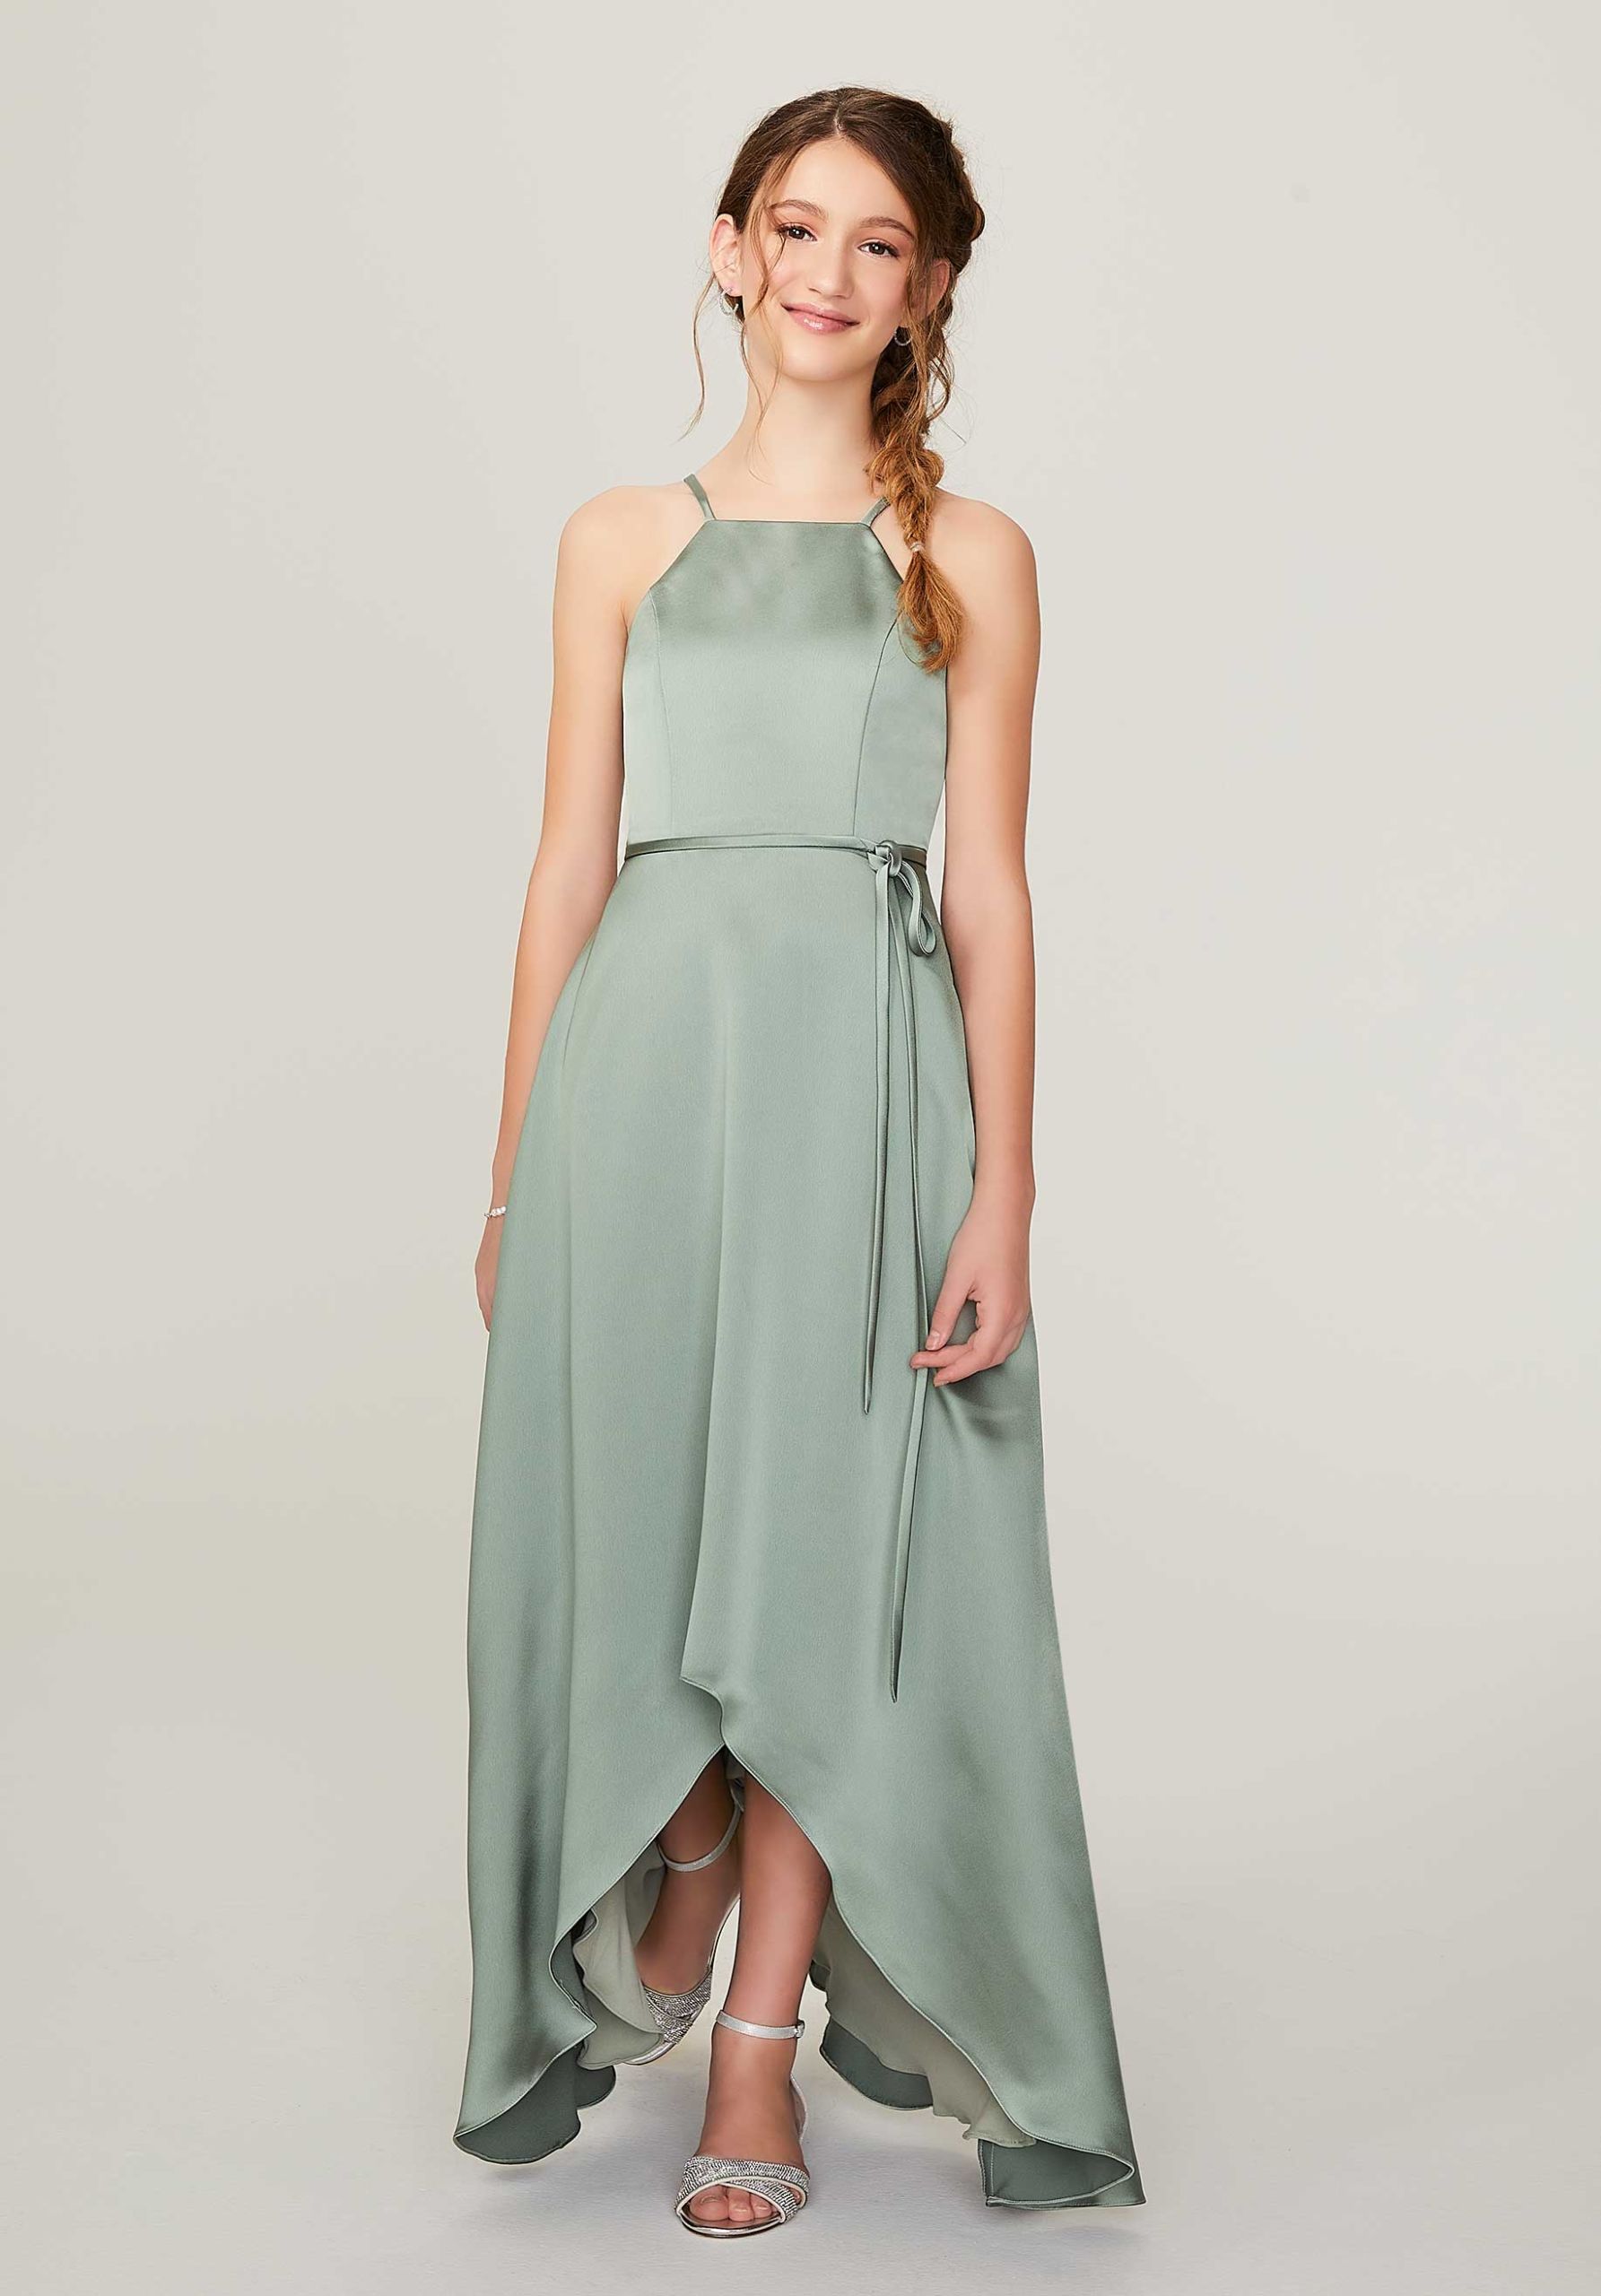 Morilee Junior Bridesmaids Dresses Style High Low Silky Satin